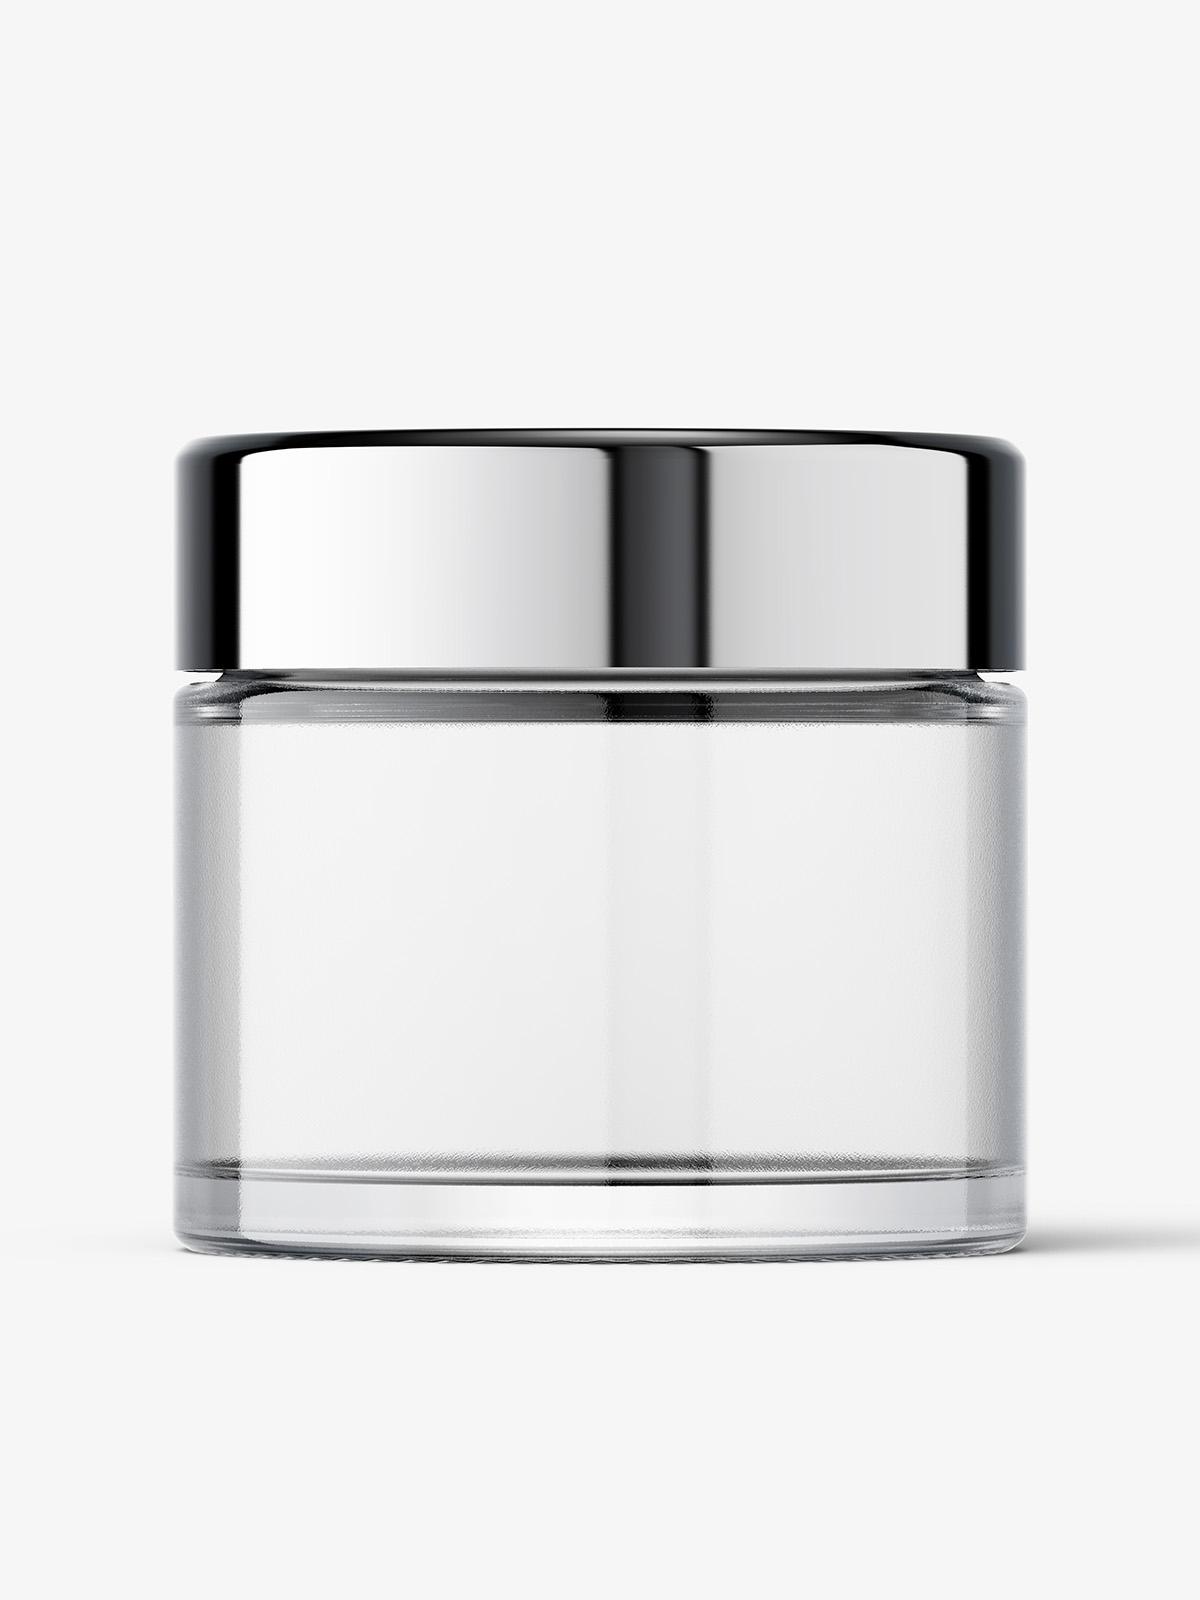 Download Clear Cosmetic Jar With Reflective Lid Mockup Smarty Mockups